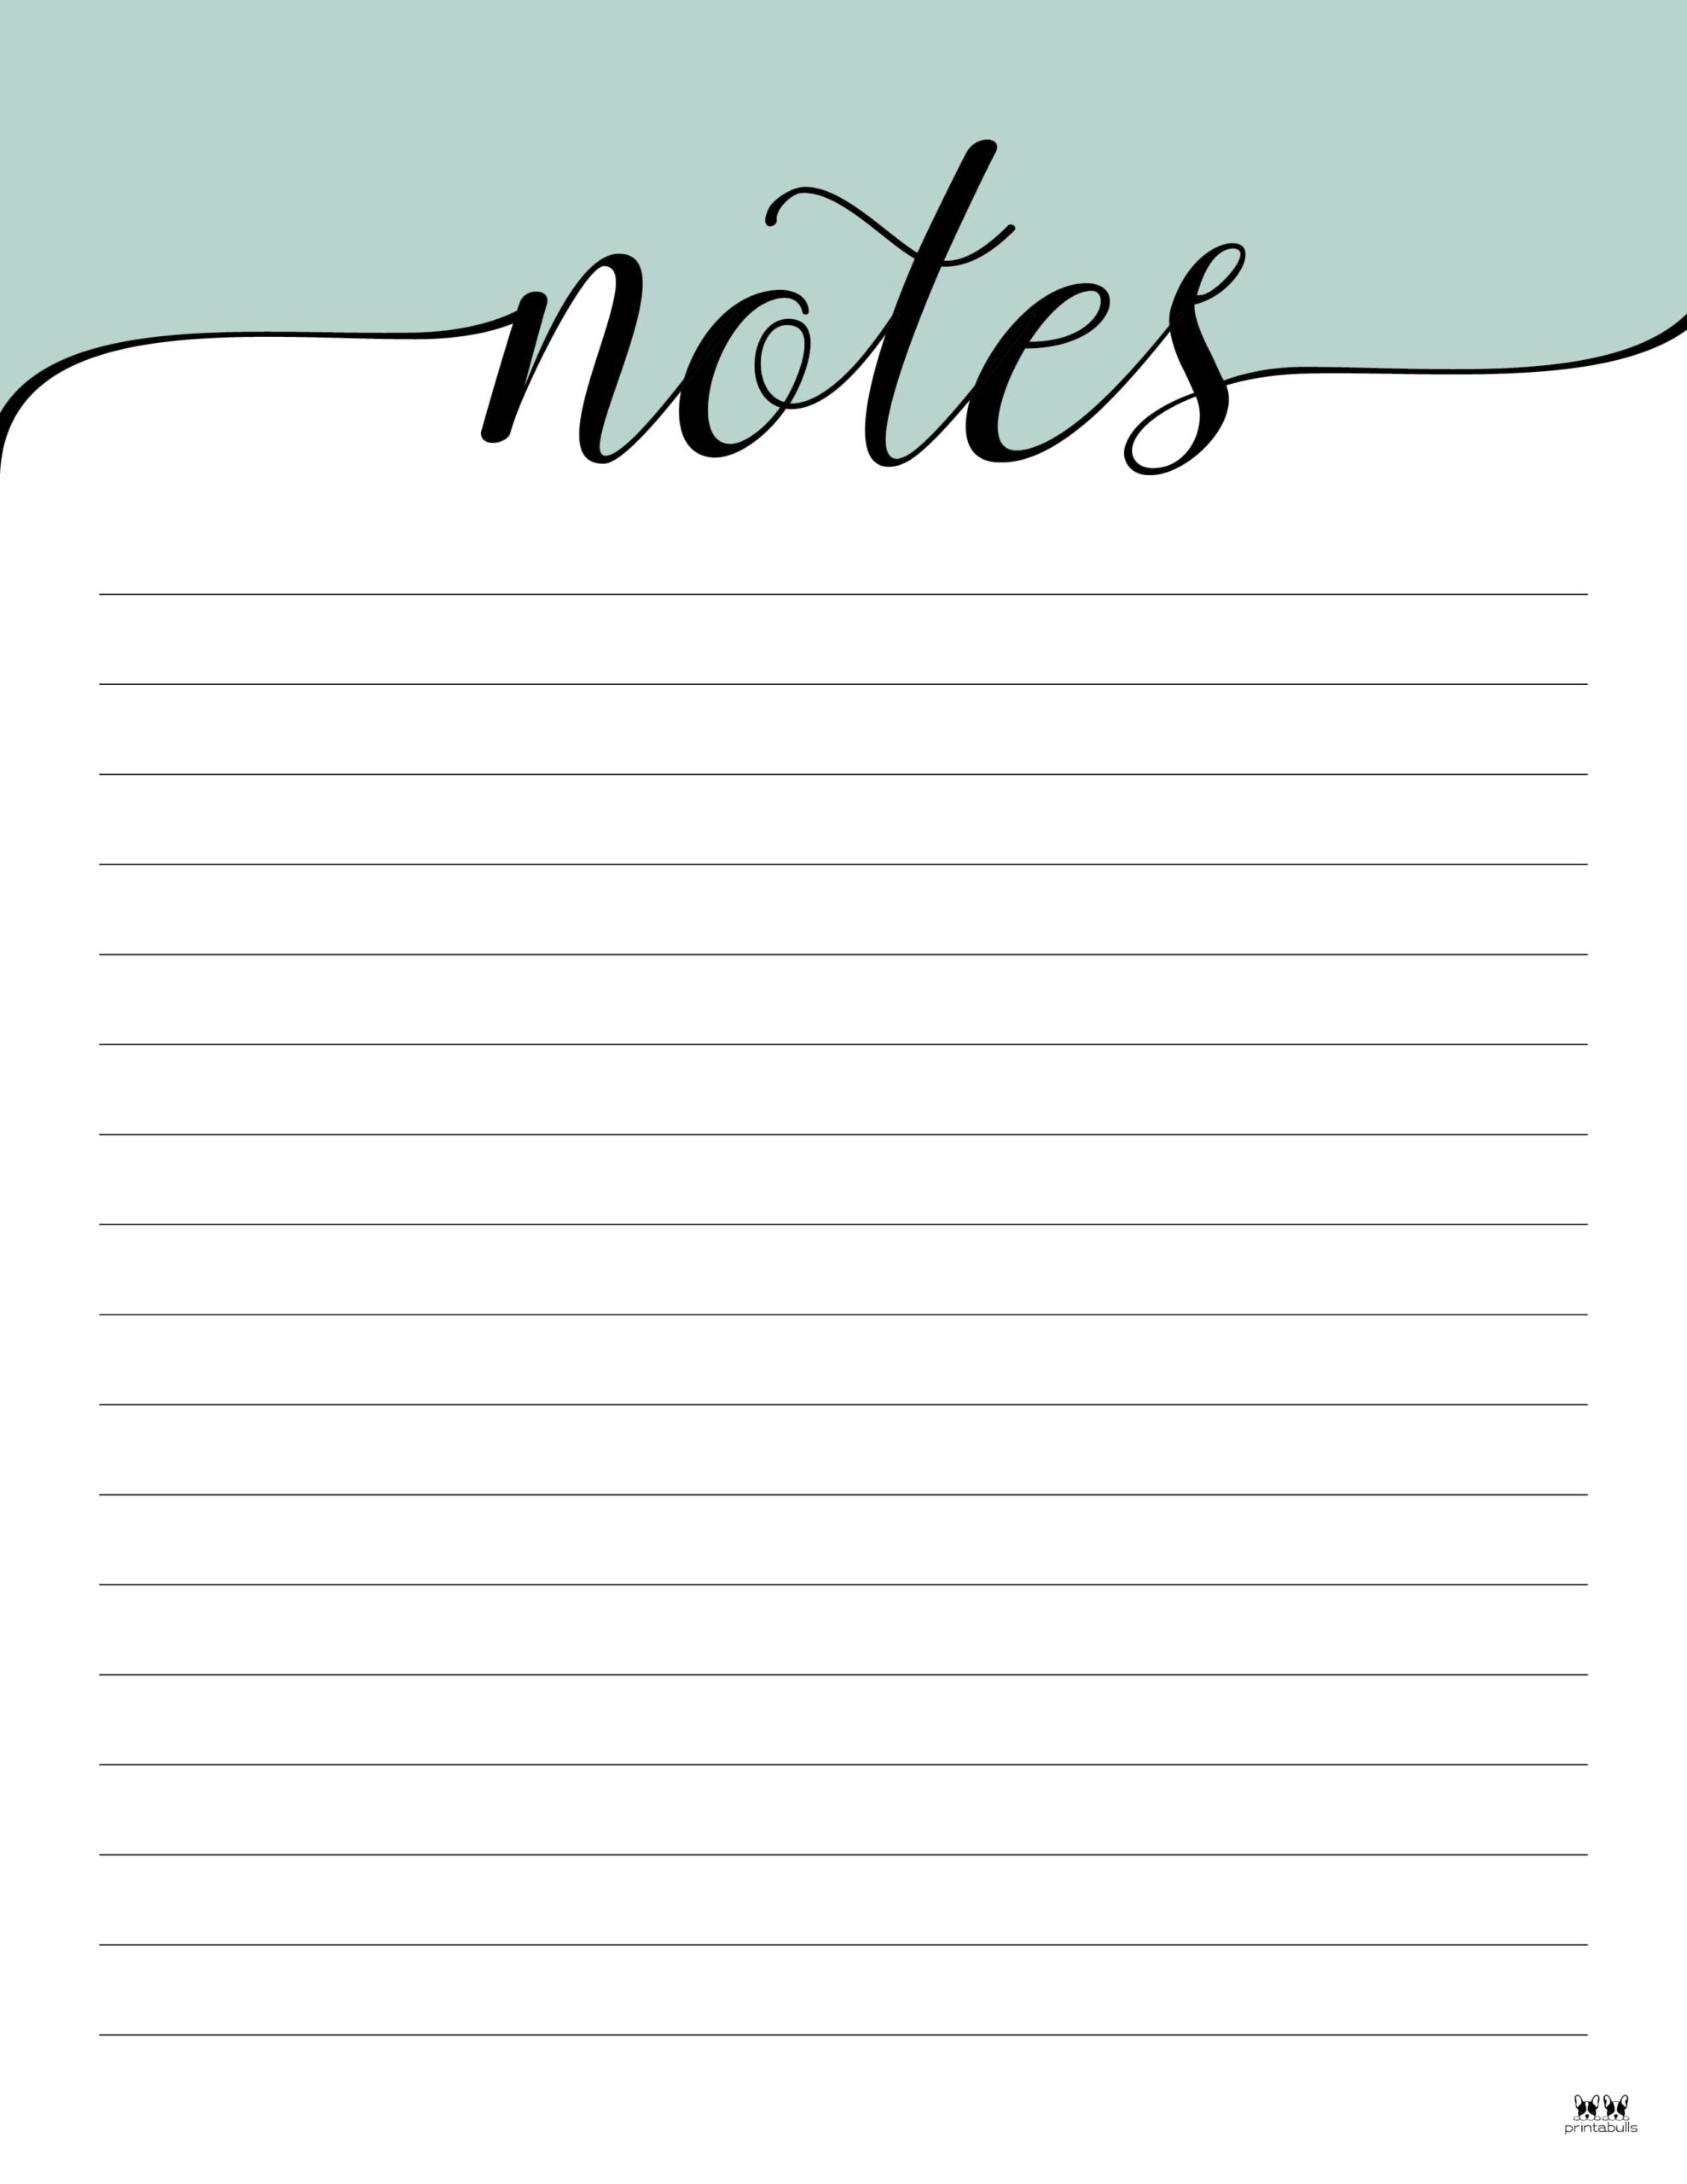 Note Pages Templates 30 FREE Printables Printabulls